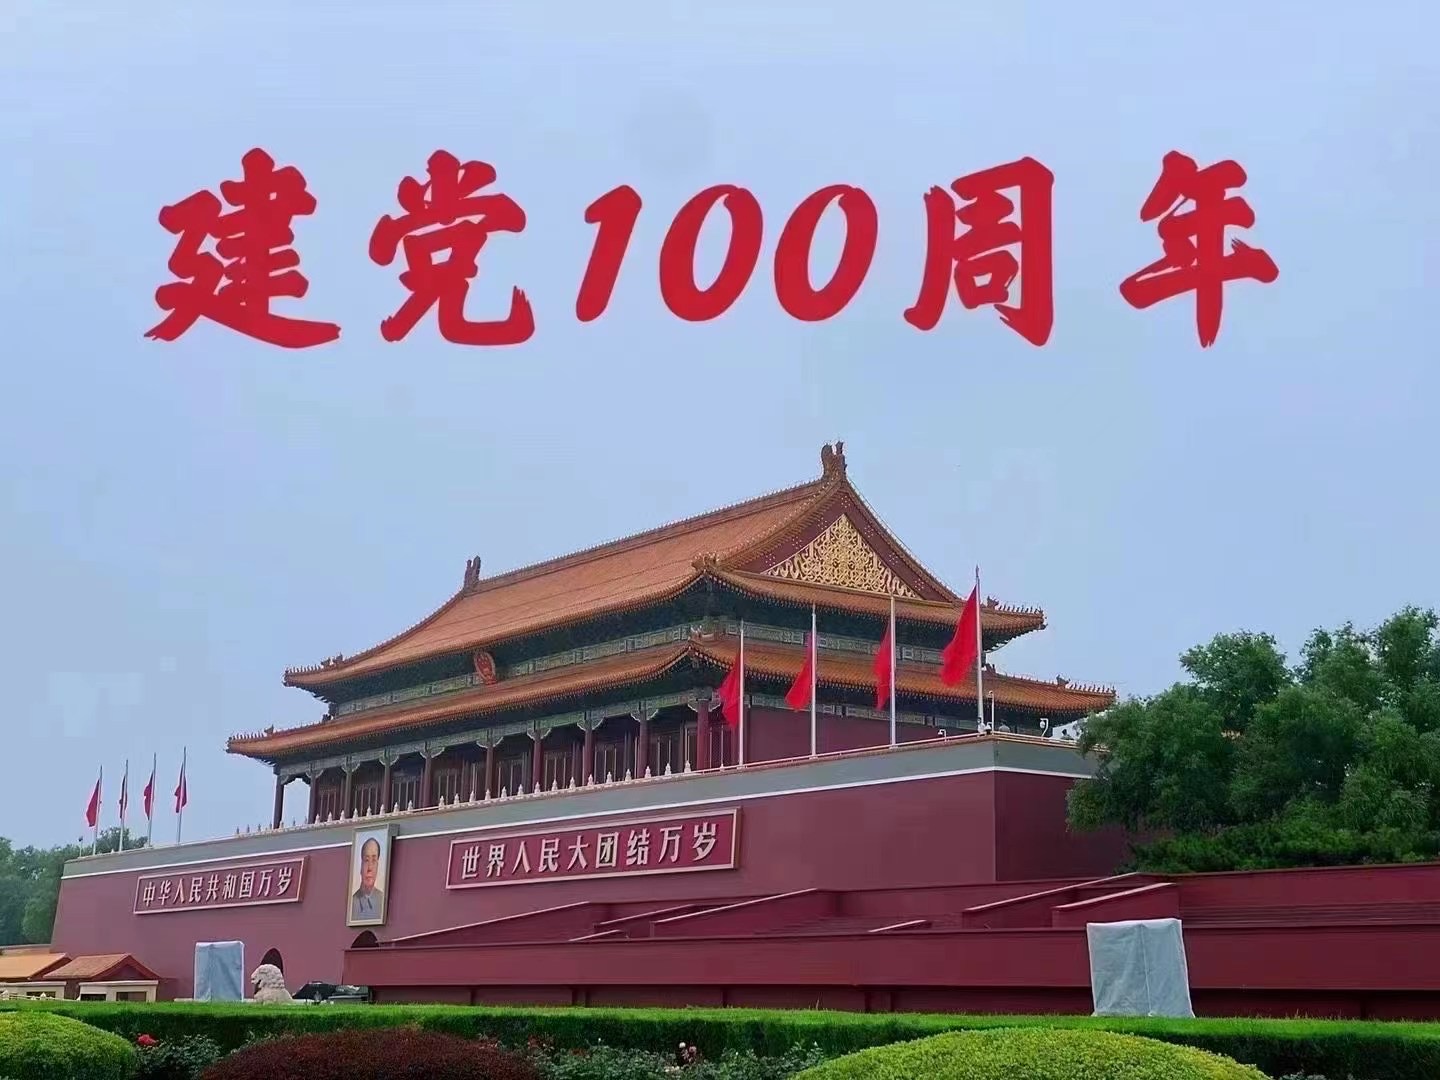 The 100th anniversary of the founding of the Communist Party of China.(图3)